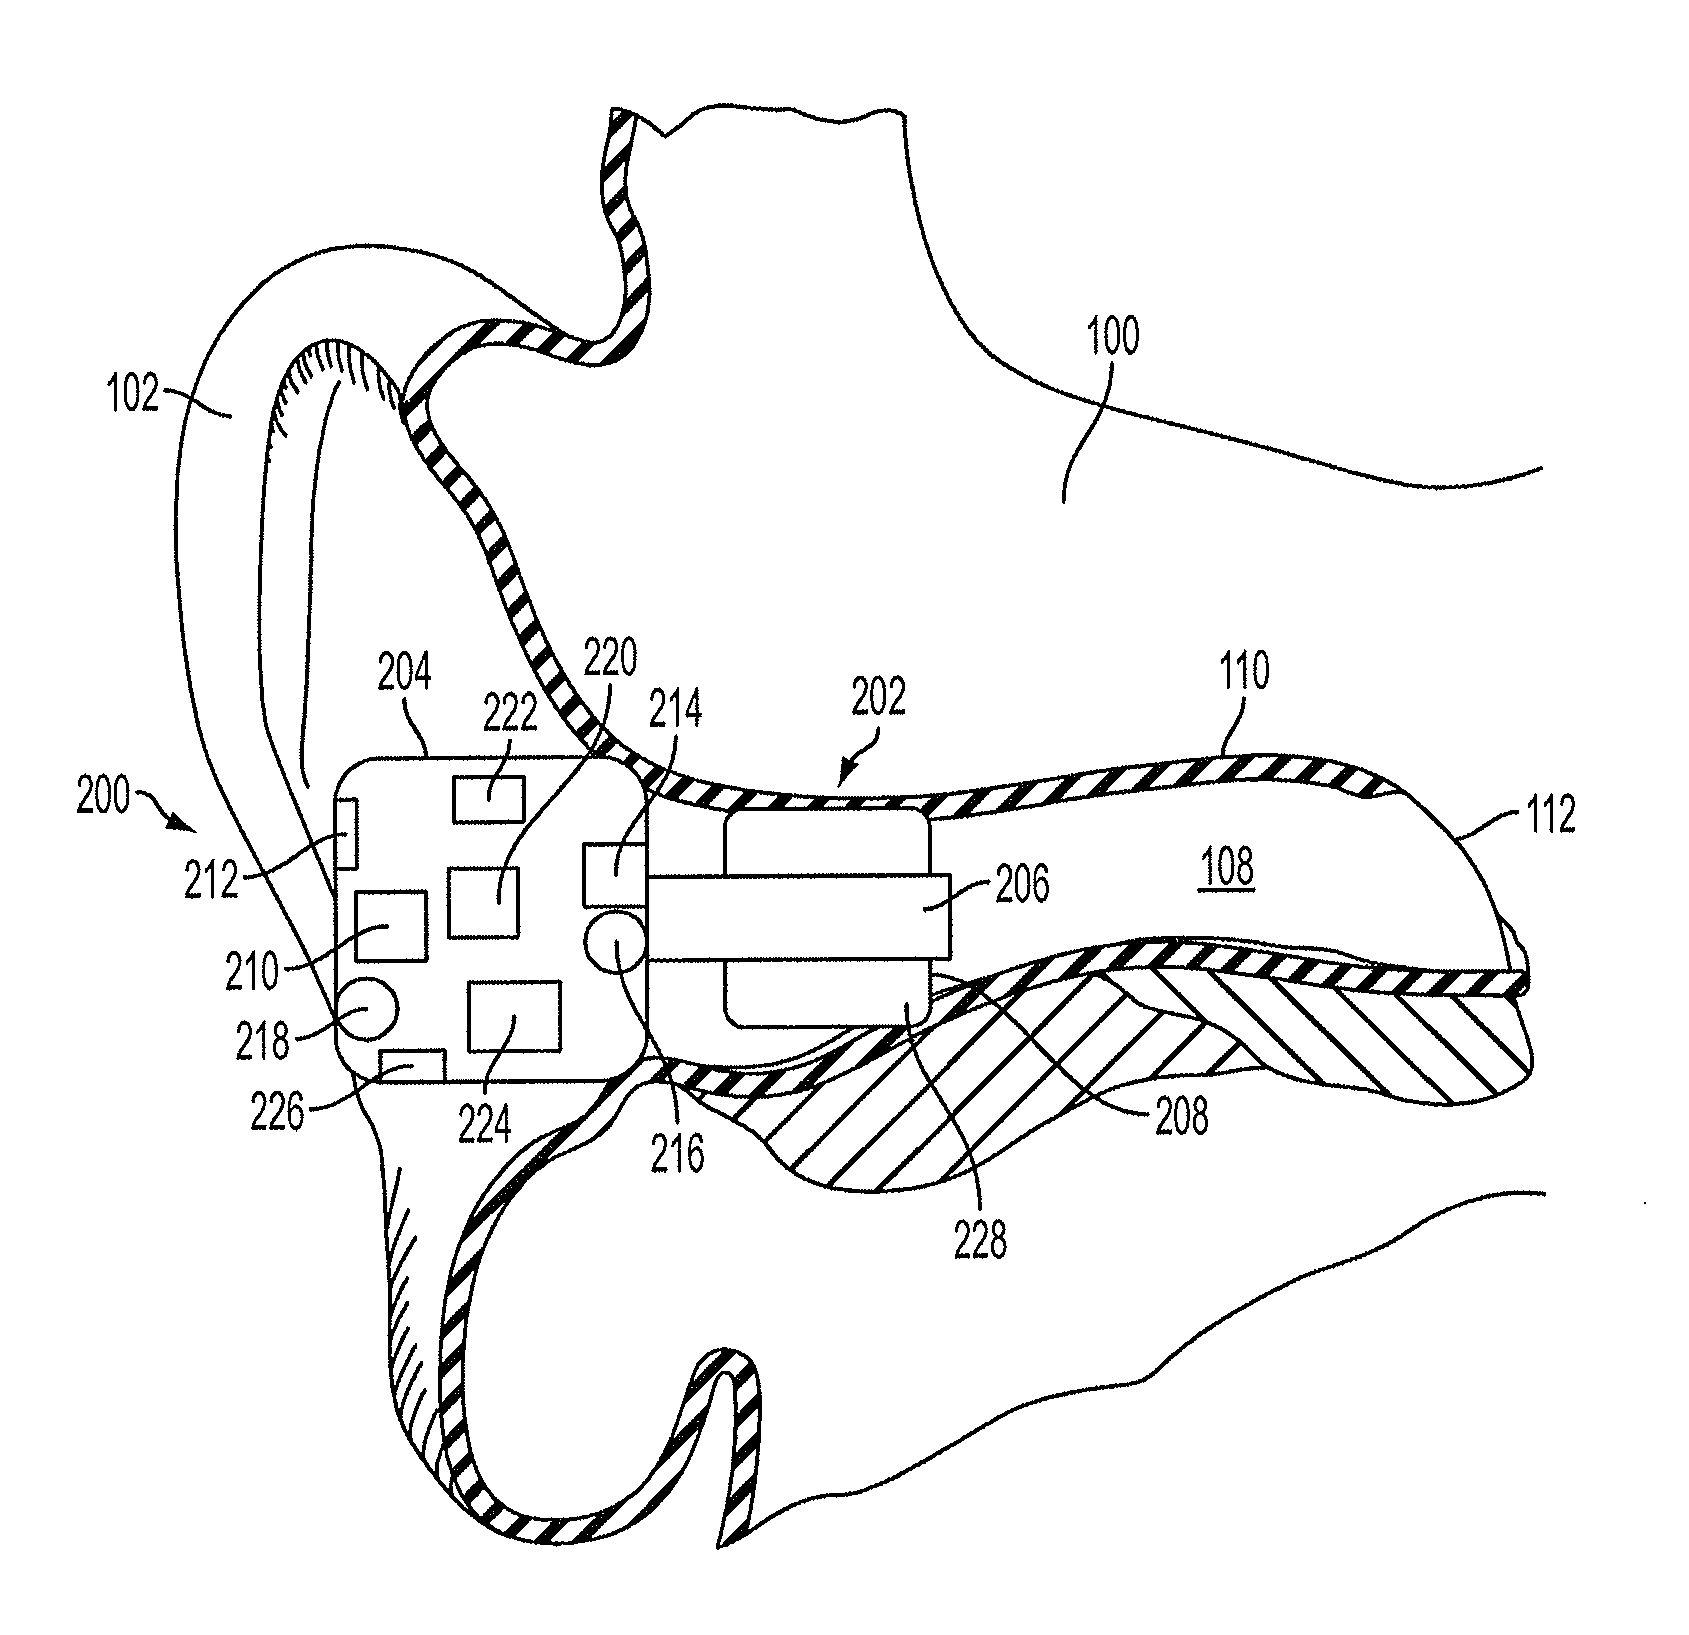 Methods and devices for occluding an ear canal having a predetermined filter characteristic